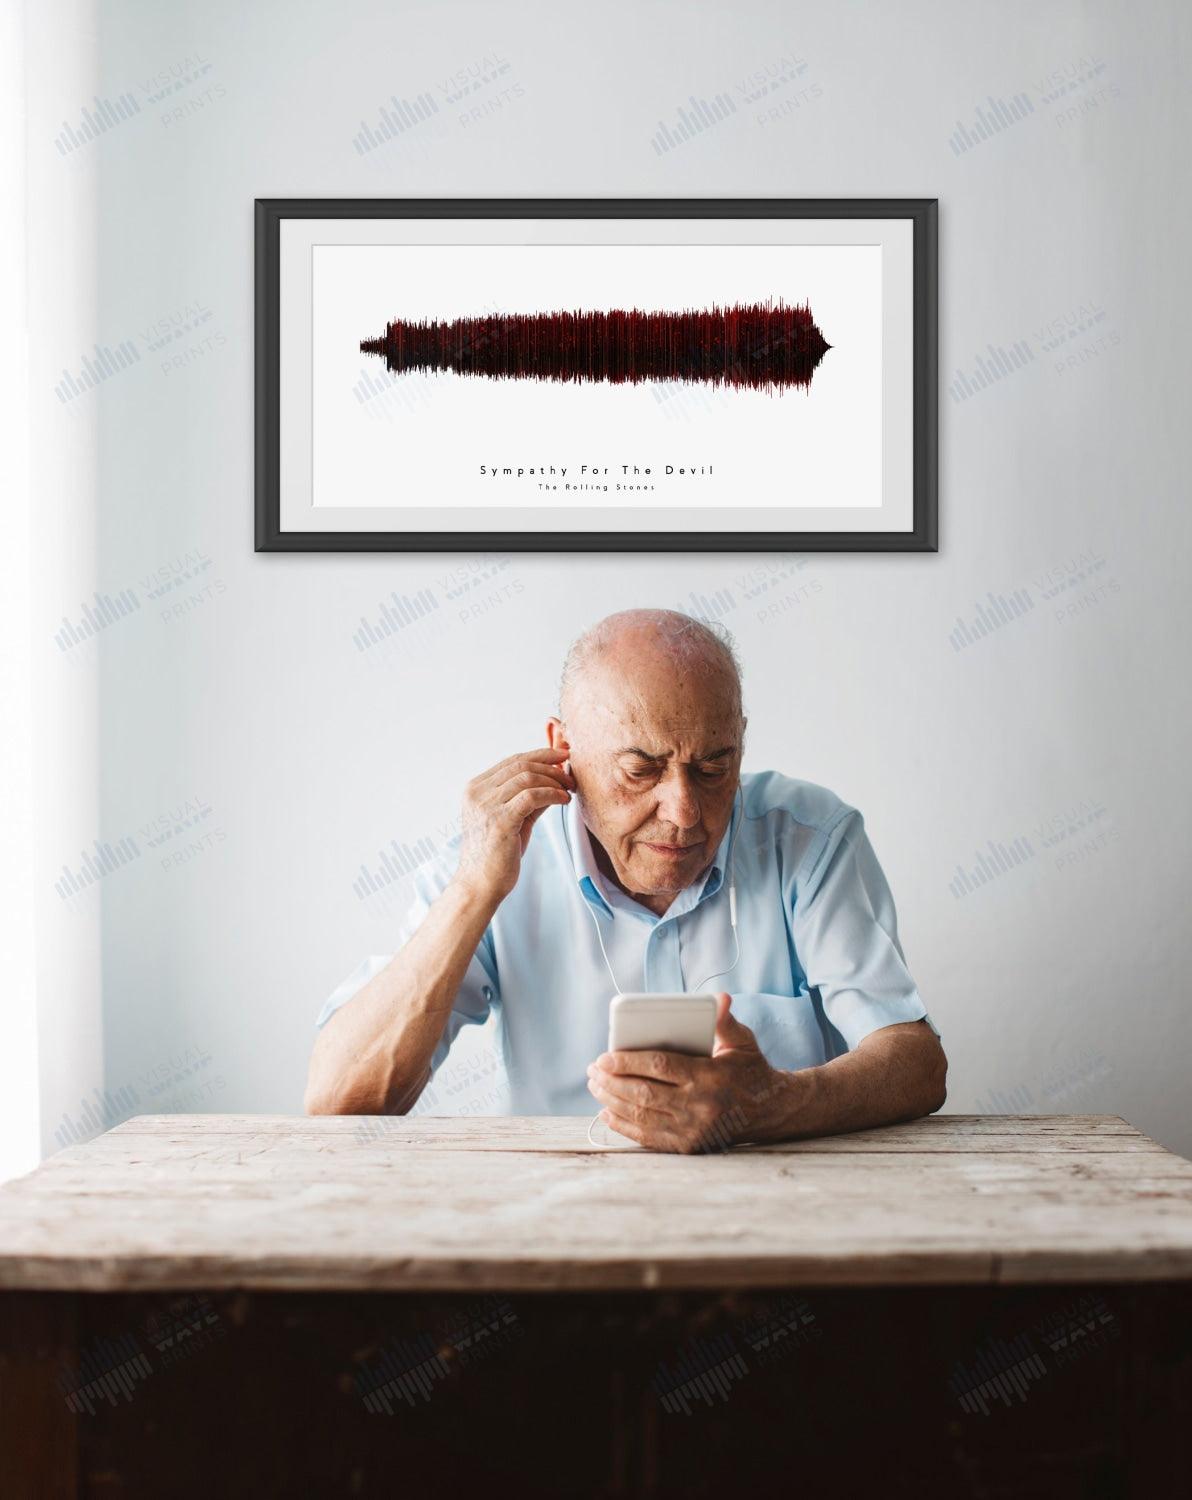 Sympathy for the Devil by The Rolling Stones - Visual Wave Prints